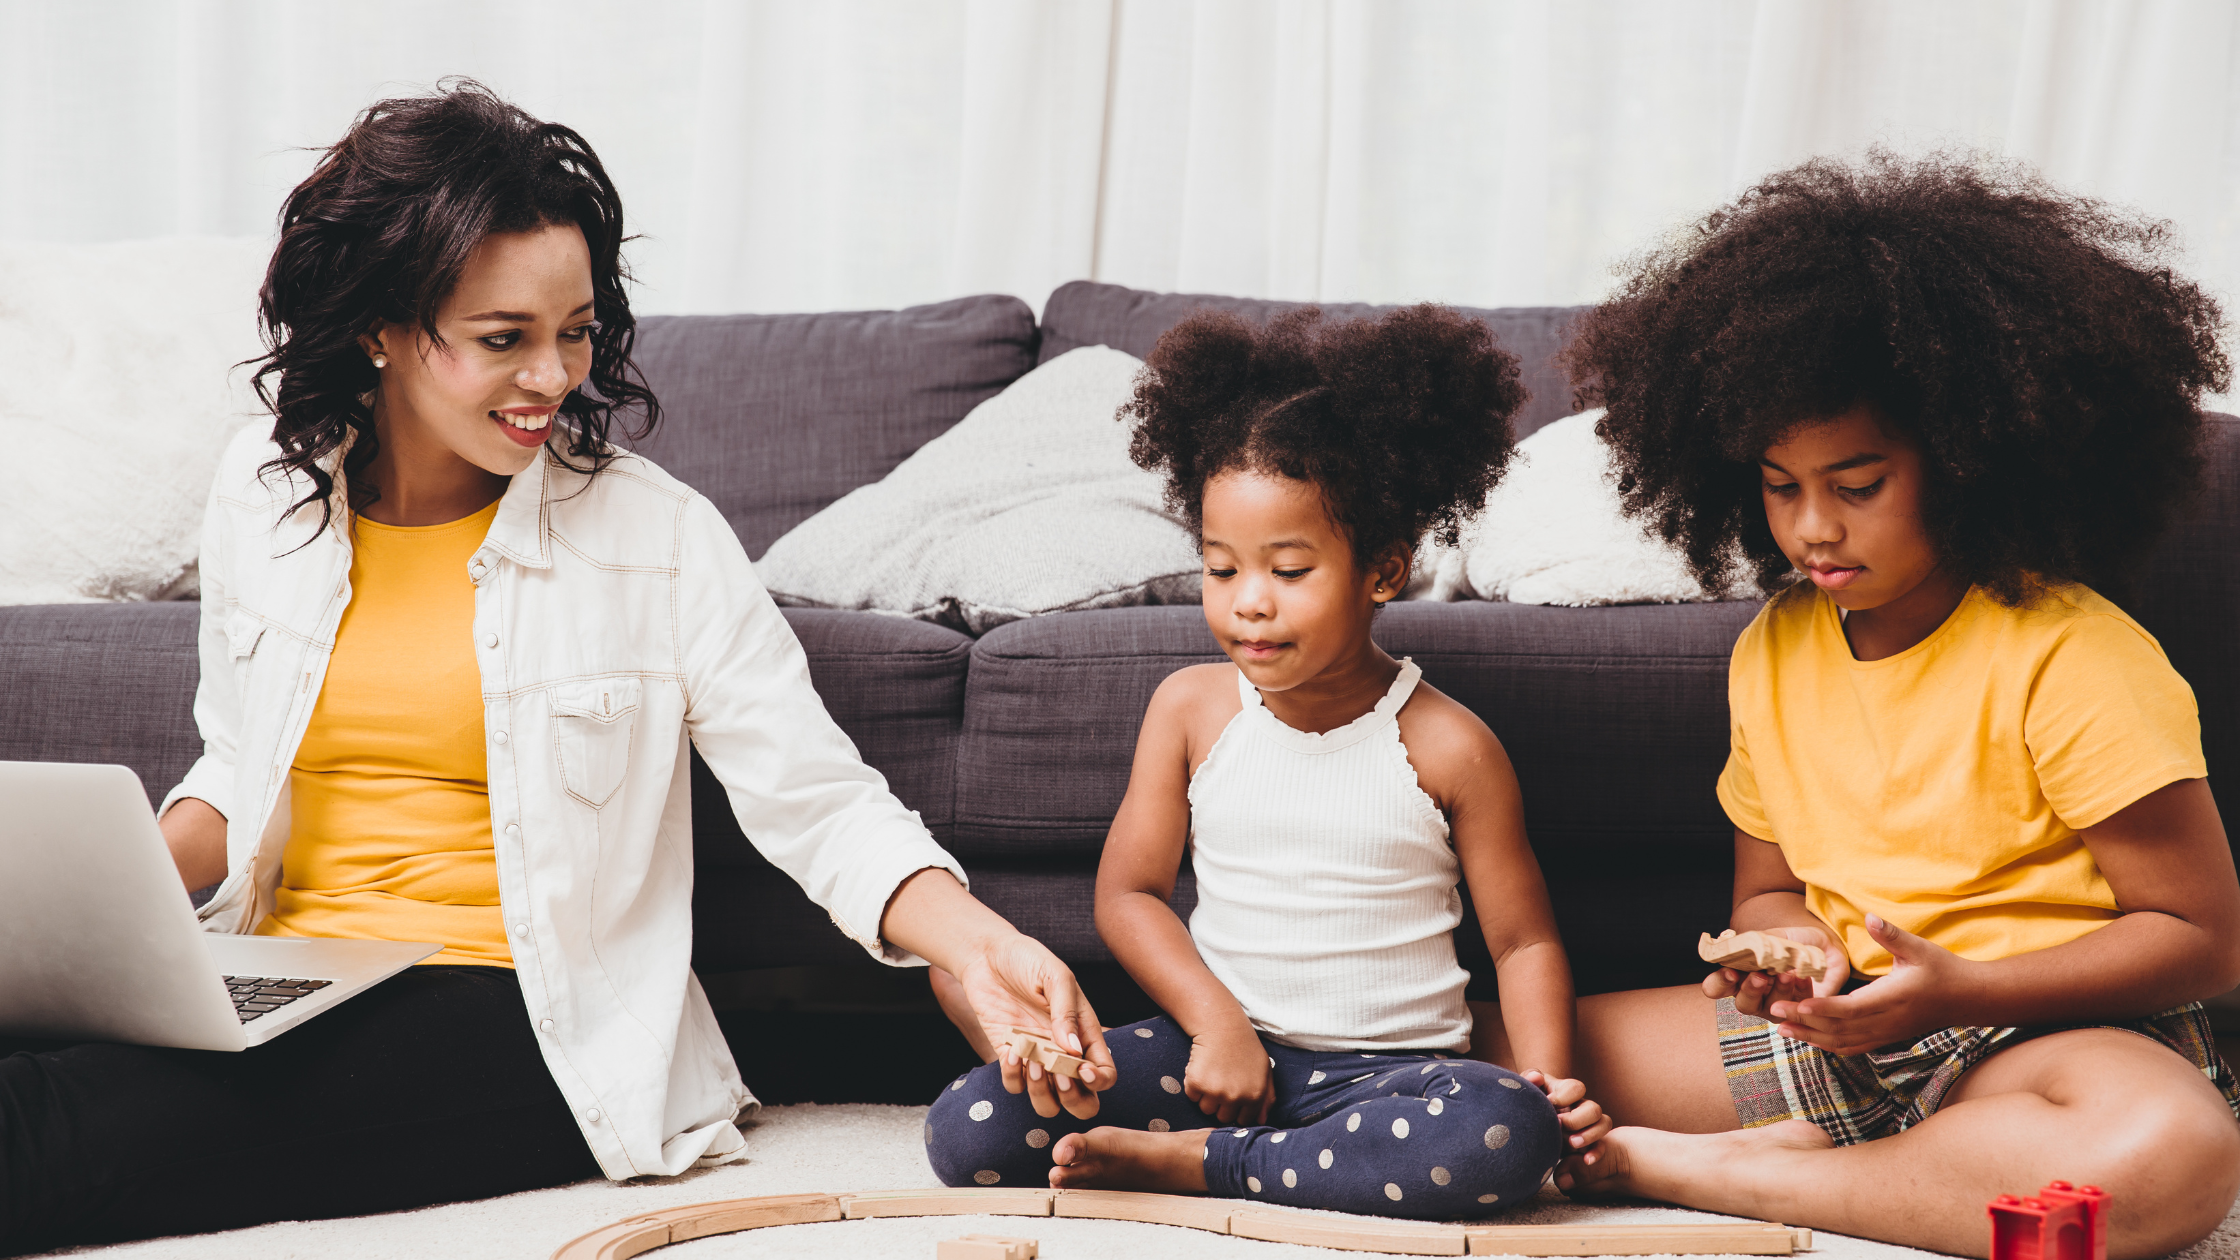 Best Resume Tips for Stay-at-Home Moms Transitioning to the Professional World